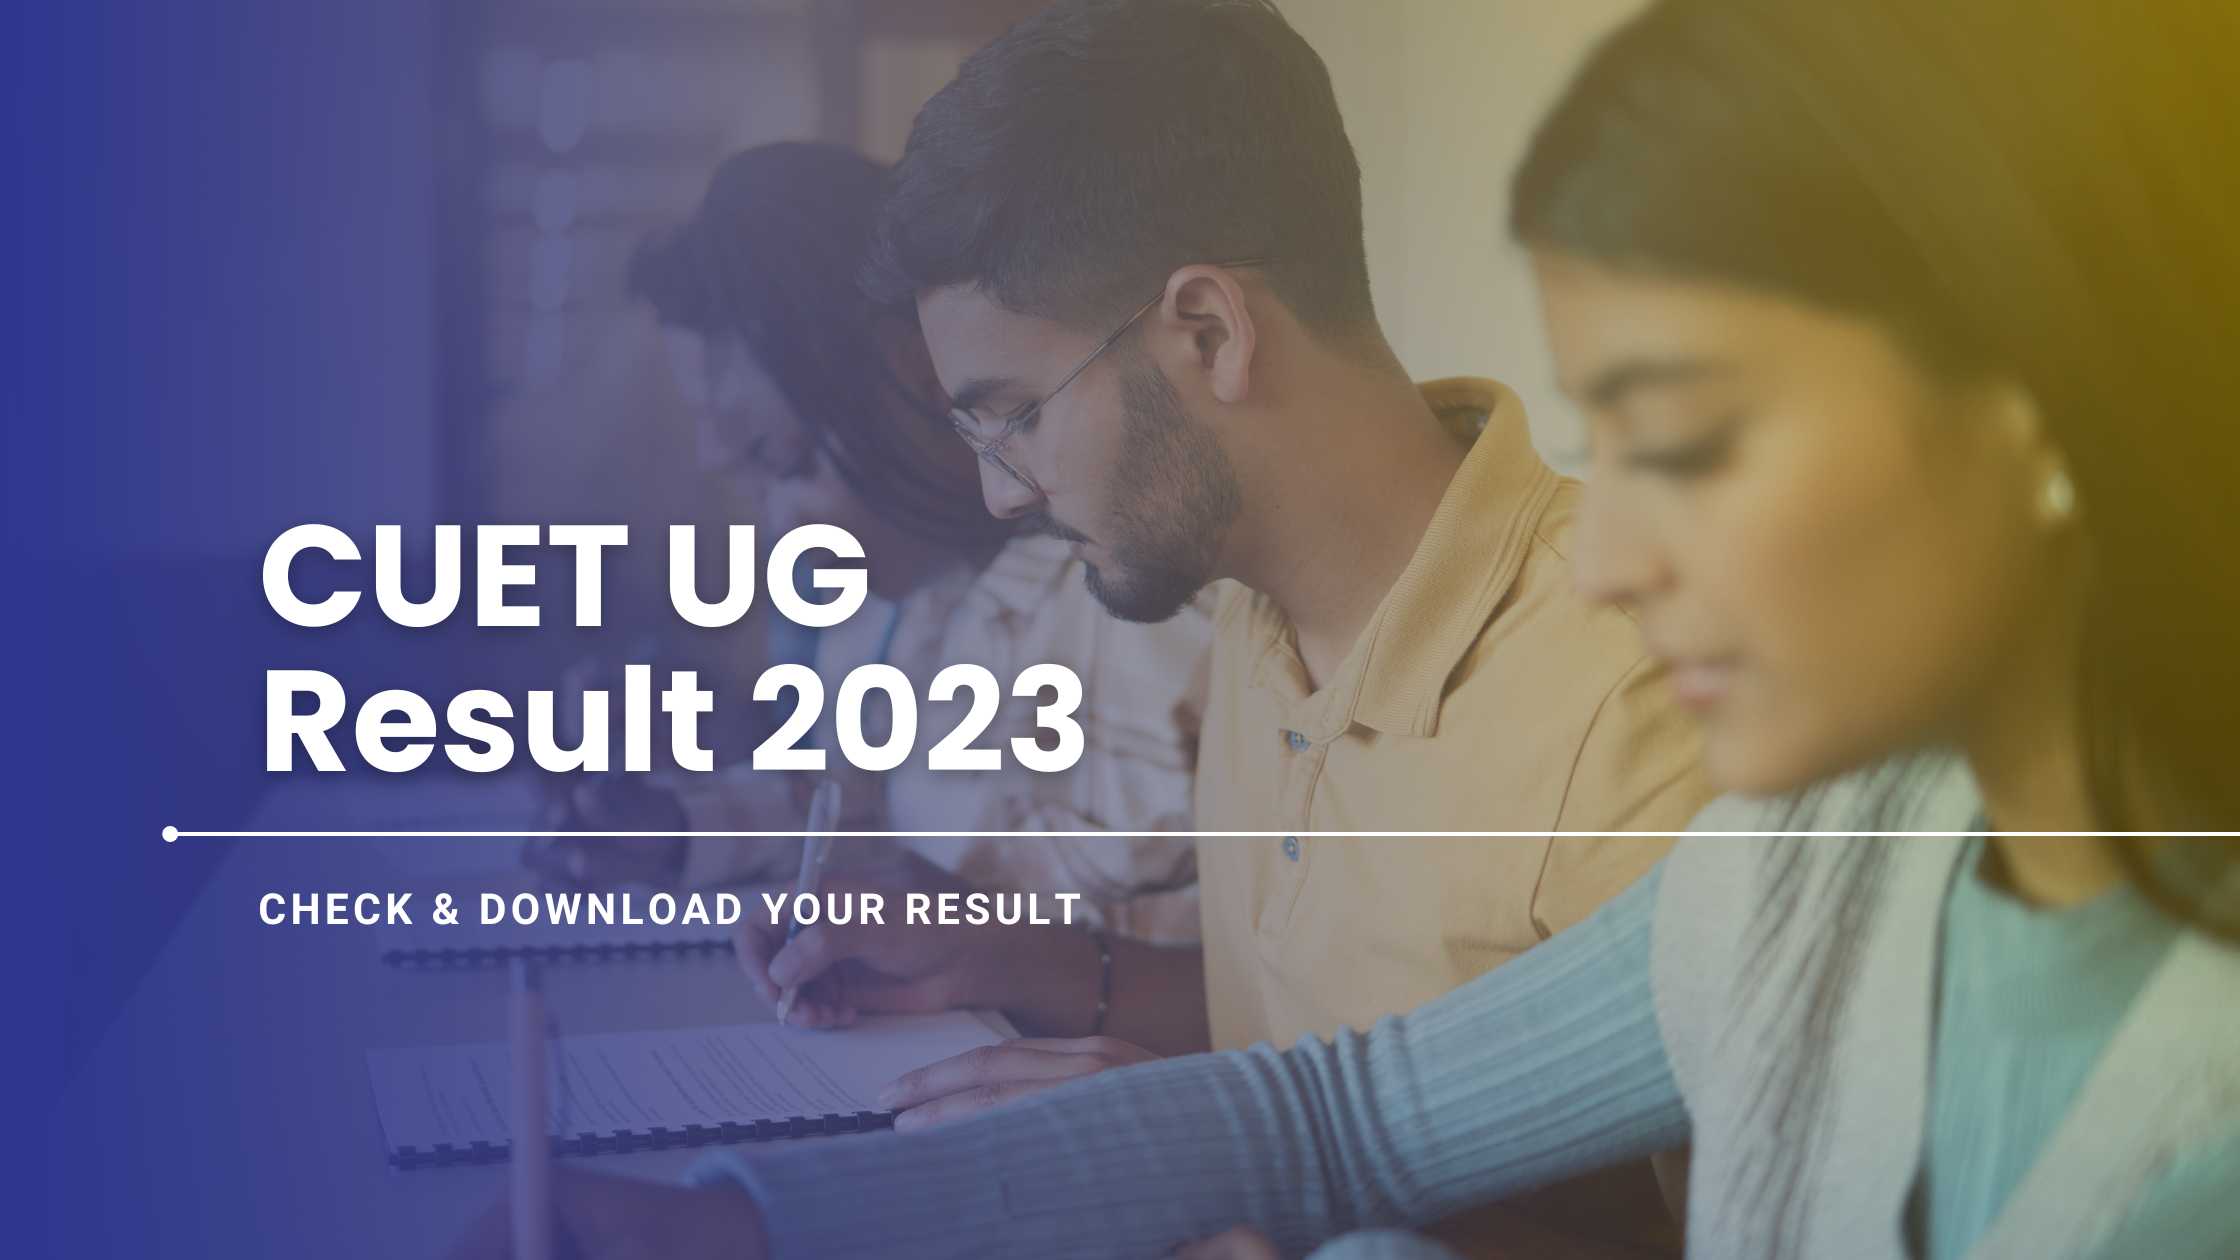 Feature image for CUET UG resut 2023